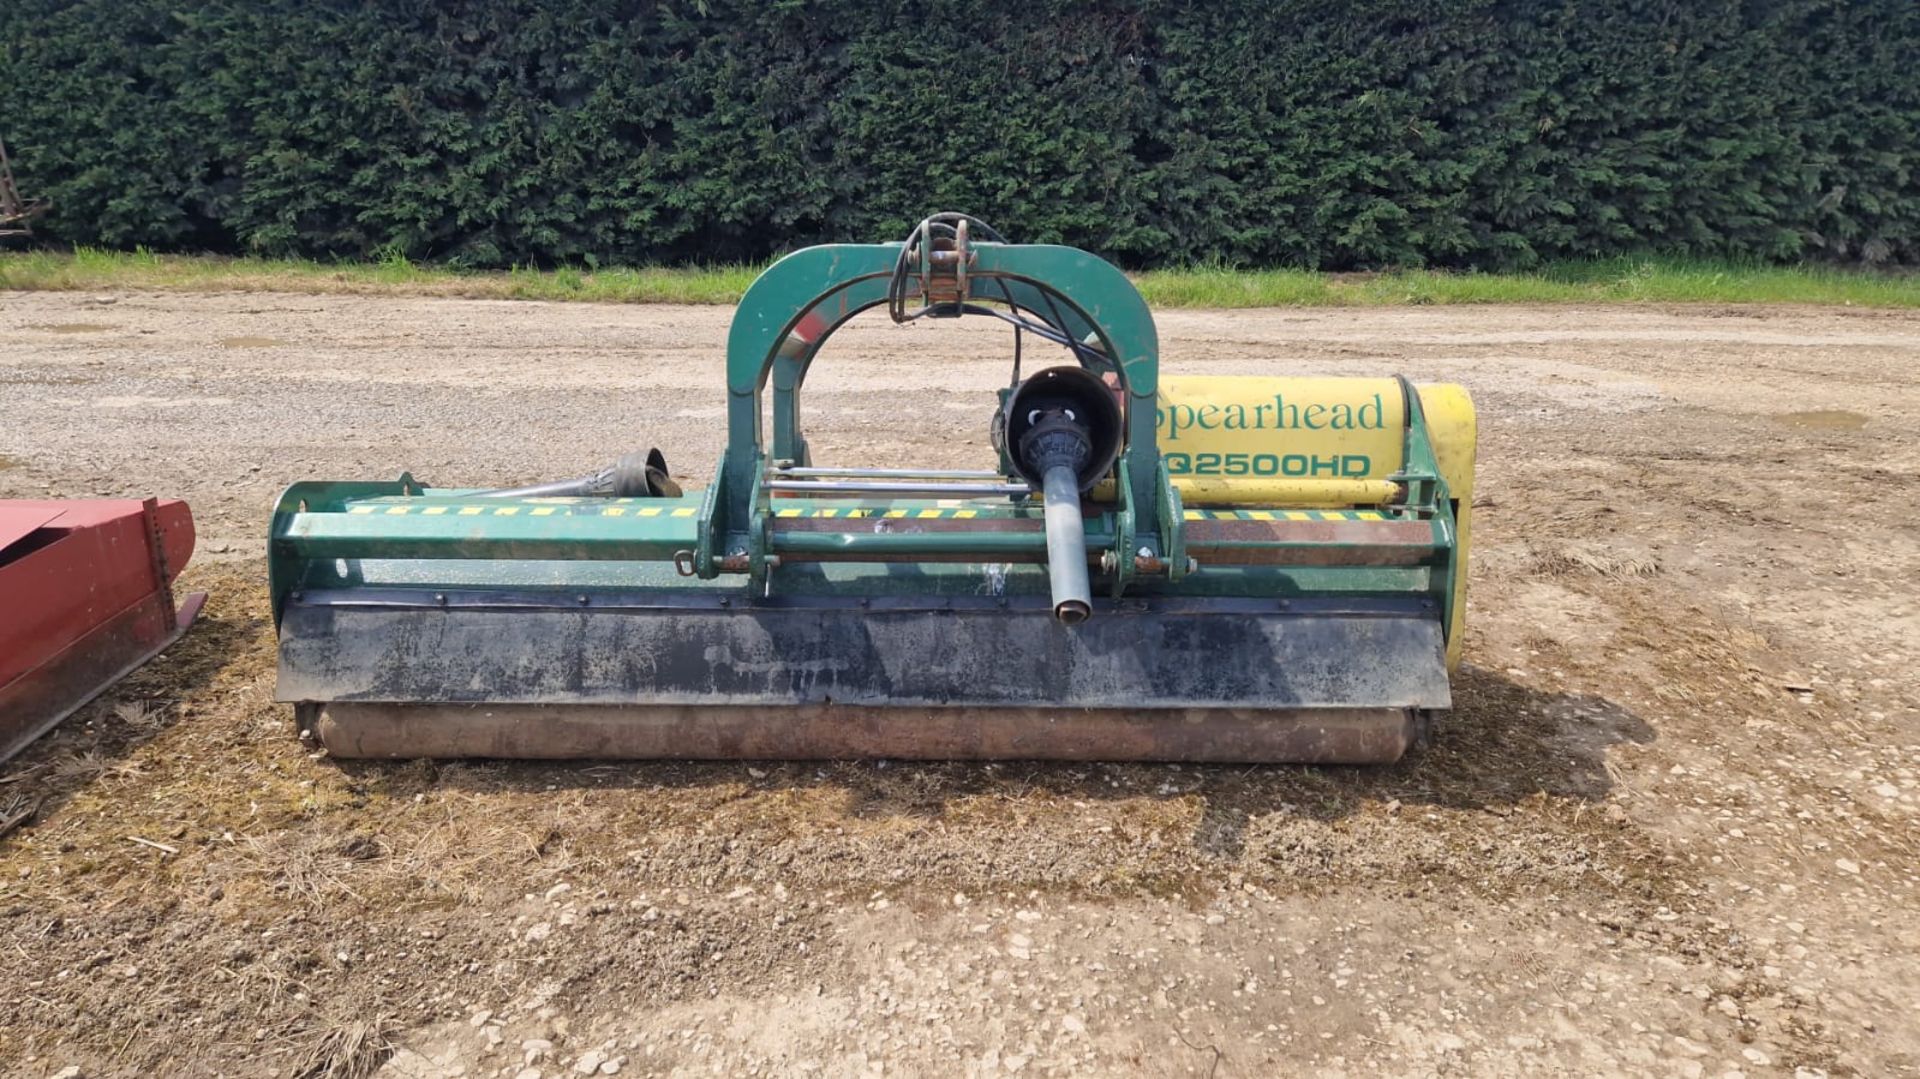 (00) Spearhead 2.6m heavy duty flail mower, serial No 1002325319 - Image 2 of 2